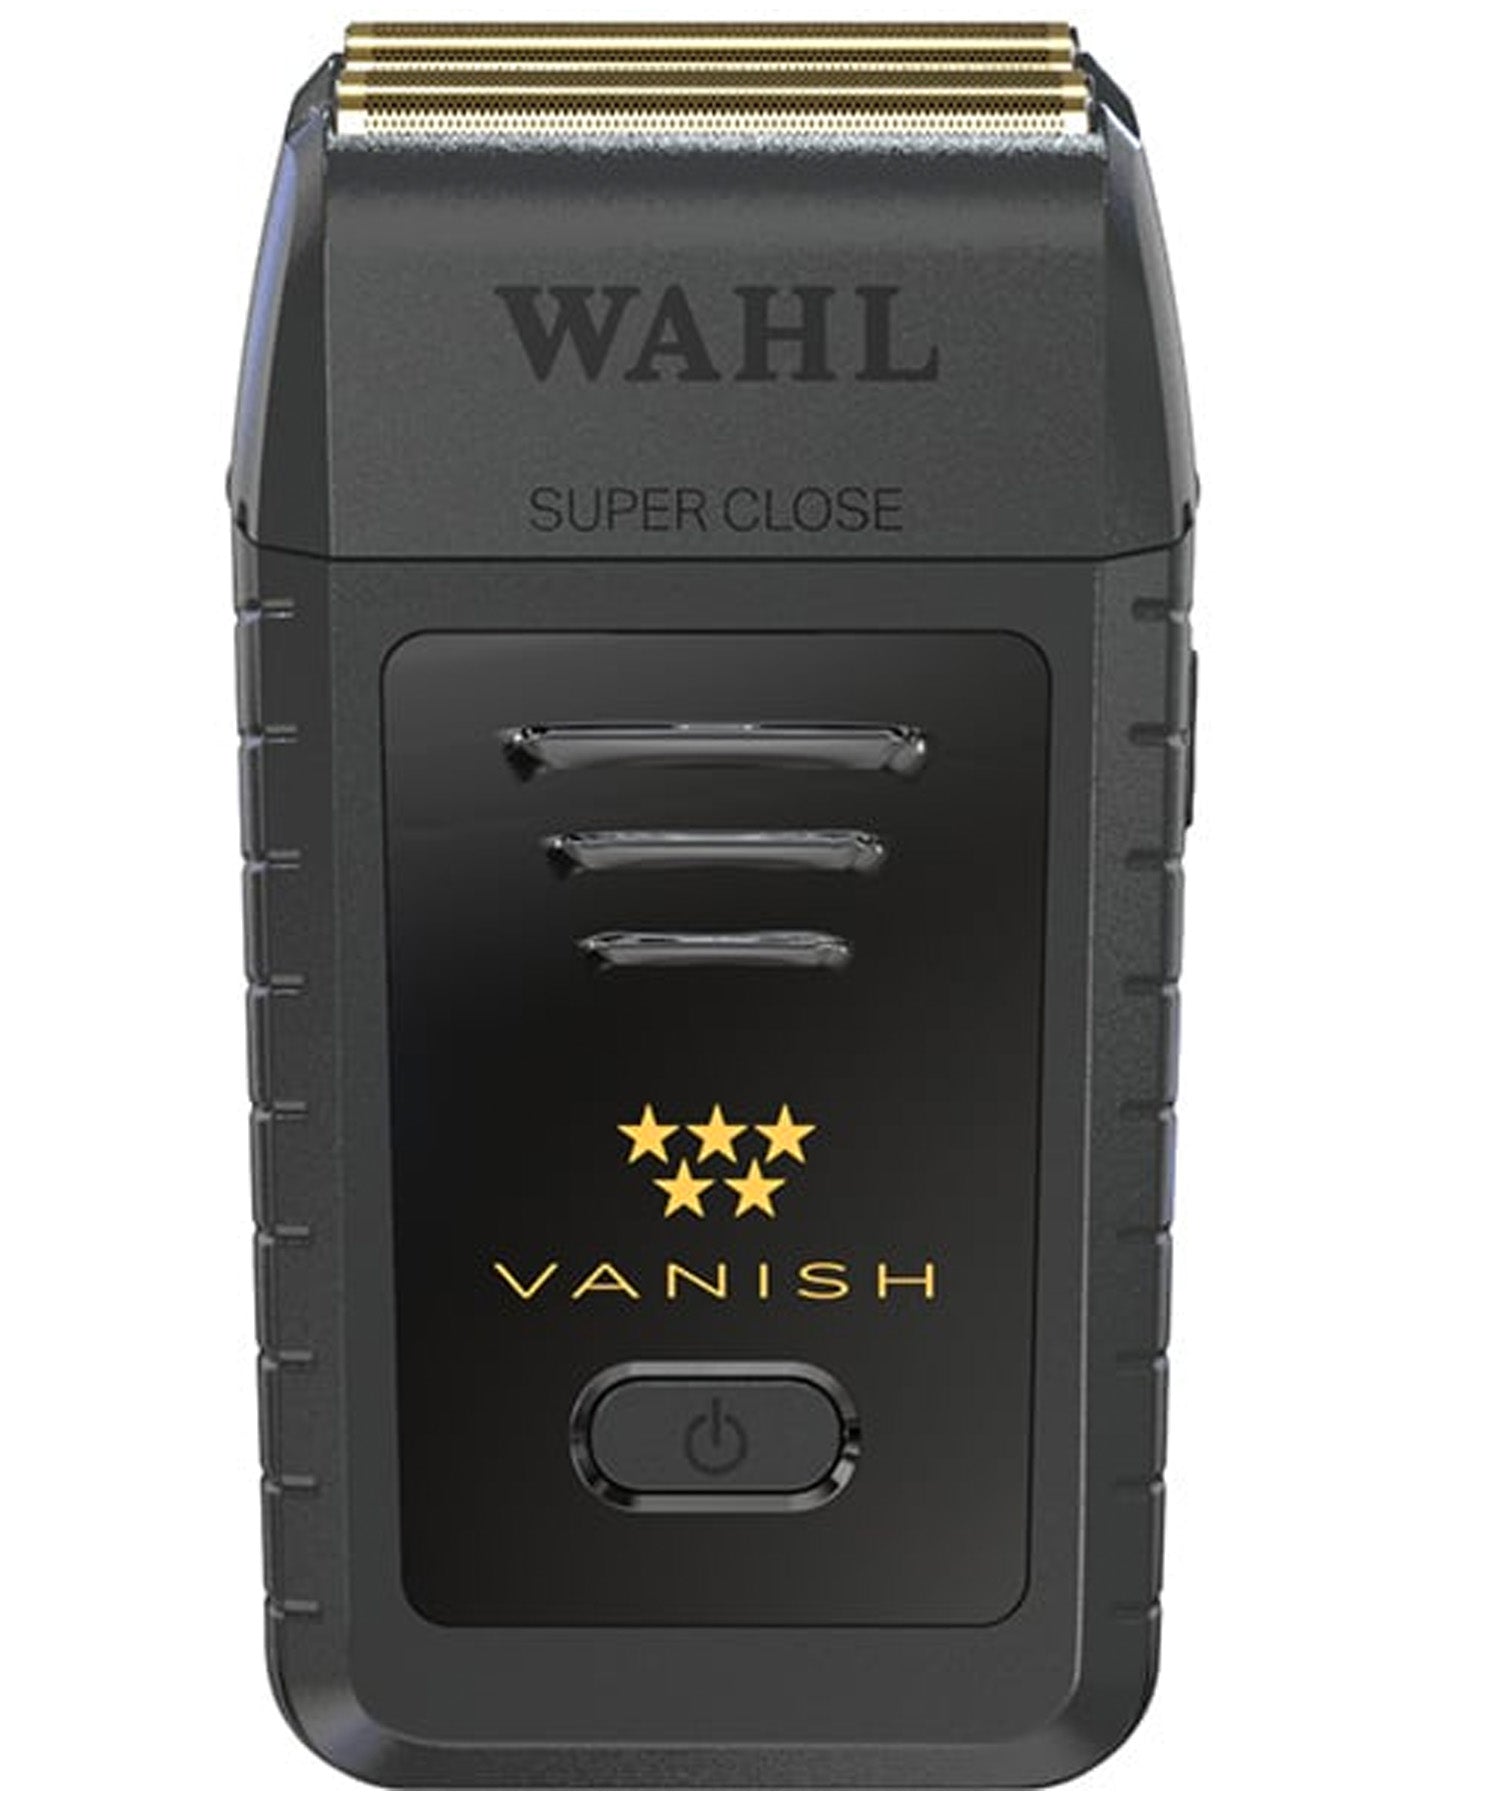 Wahl Professional 5 Star Vanish Rechargeable Shaver, 3023551